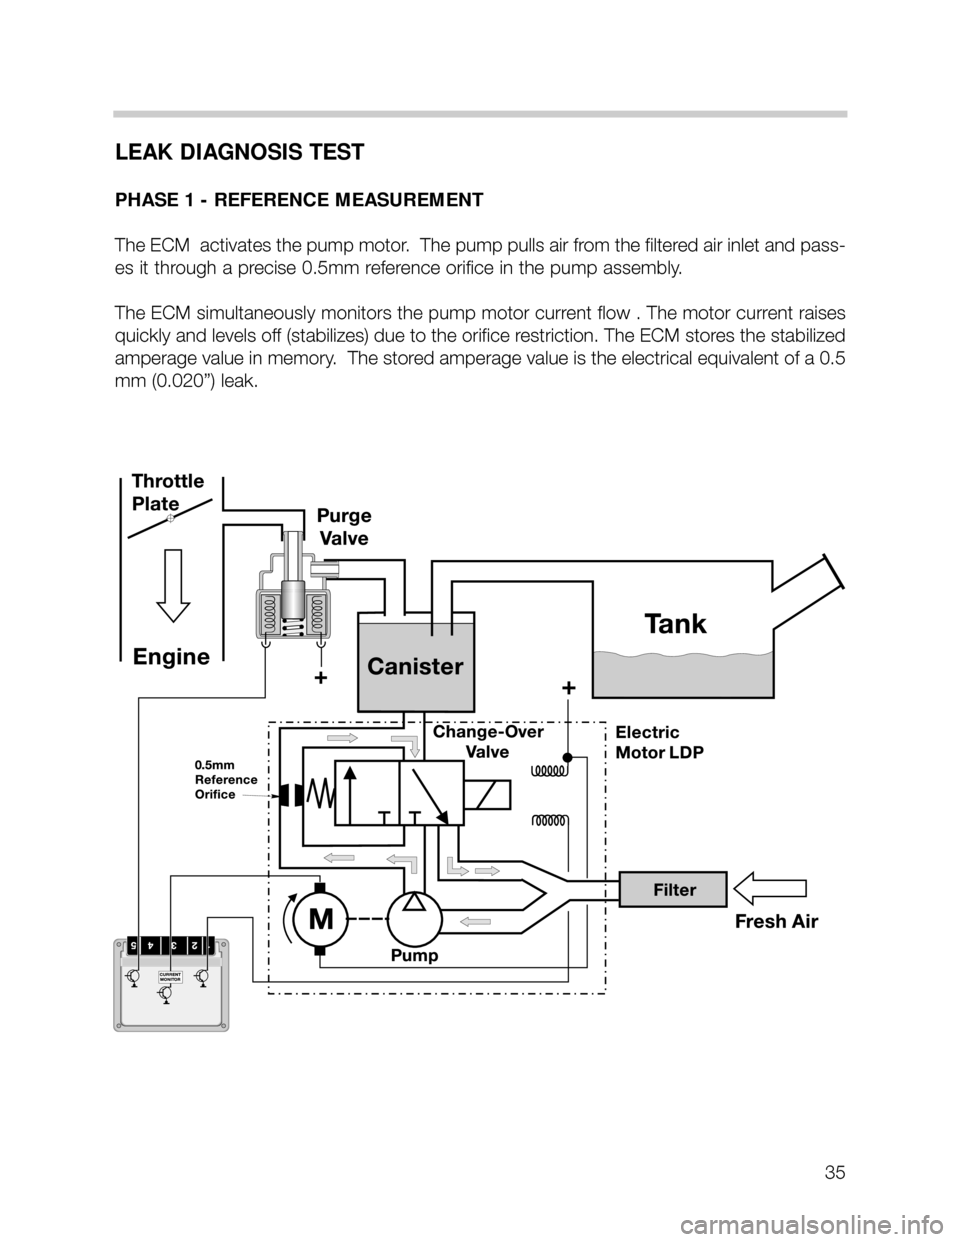 BMW X5 2006 E53 M62TU Engine Owners Guide LEAK DIAGNOSIS TEST
PHASE 1 - REFERENCE MEASUREMENT
The ECM  activates the pump motor.  The pump pulls air from the filtered air inlet and pass-
es it through a precise 0.5mm reference orifice in the 